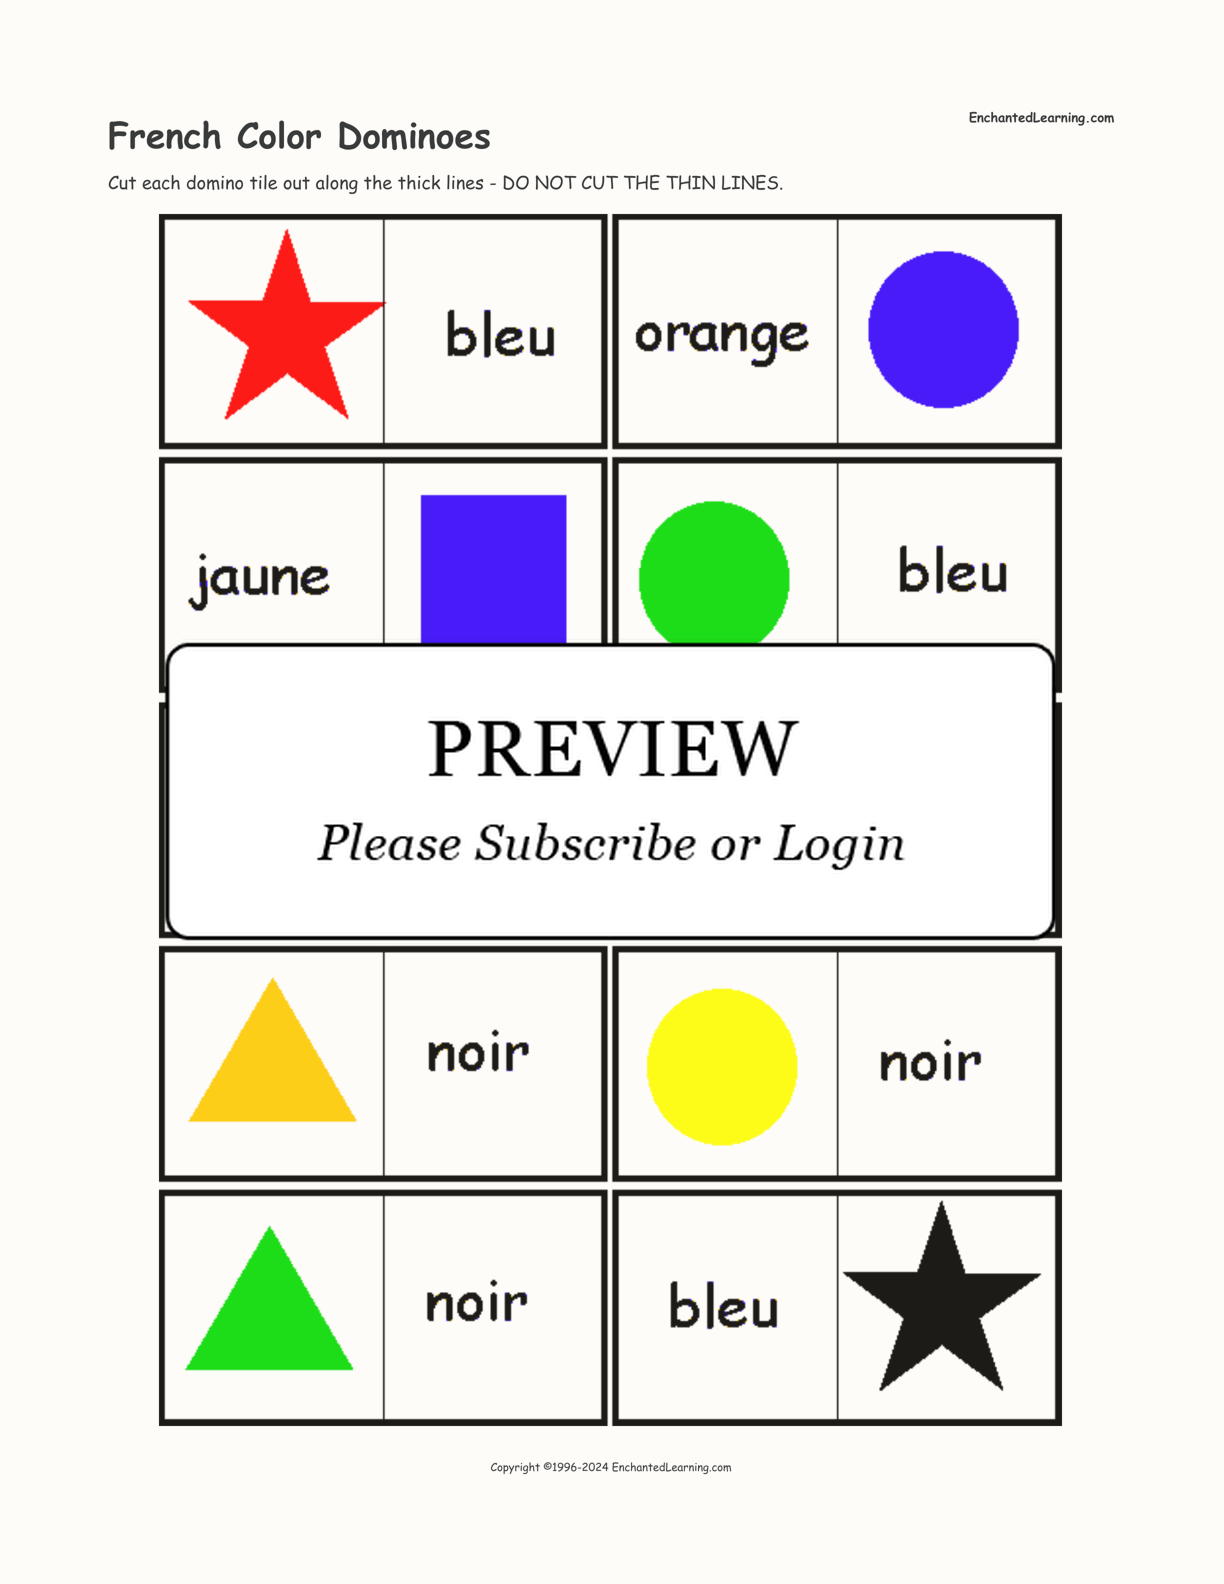 French Color Dominoes interactive printout page 1